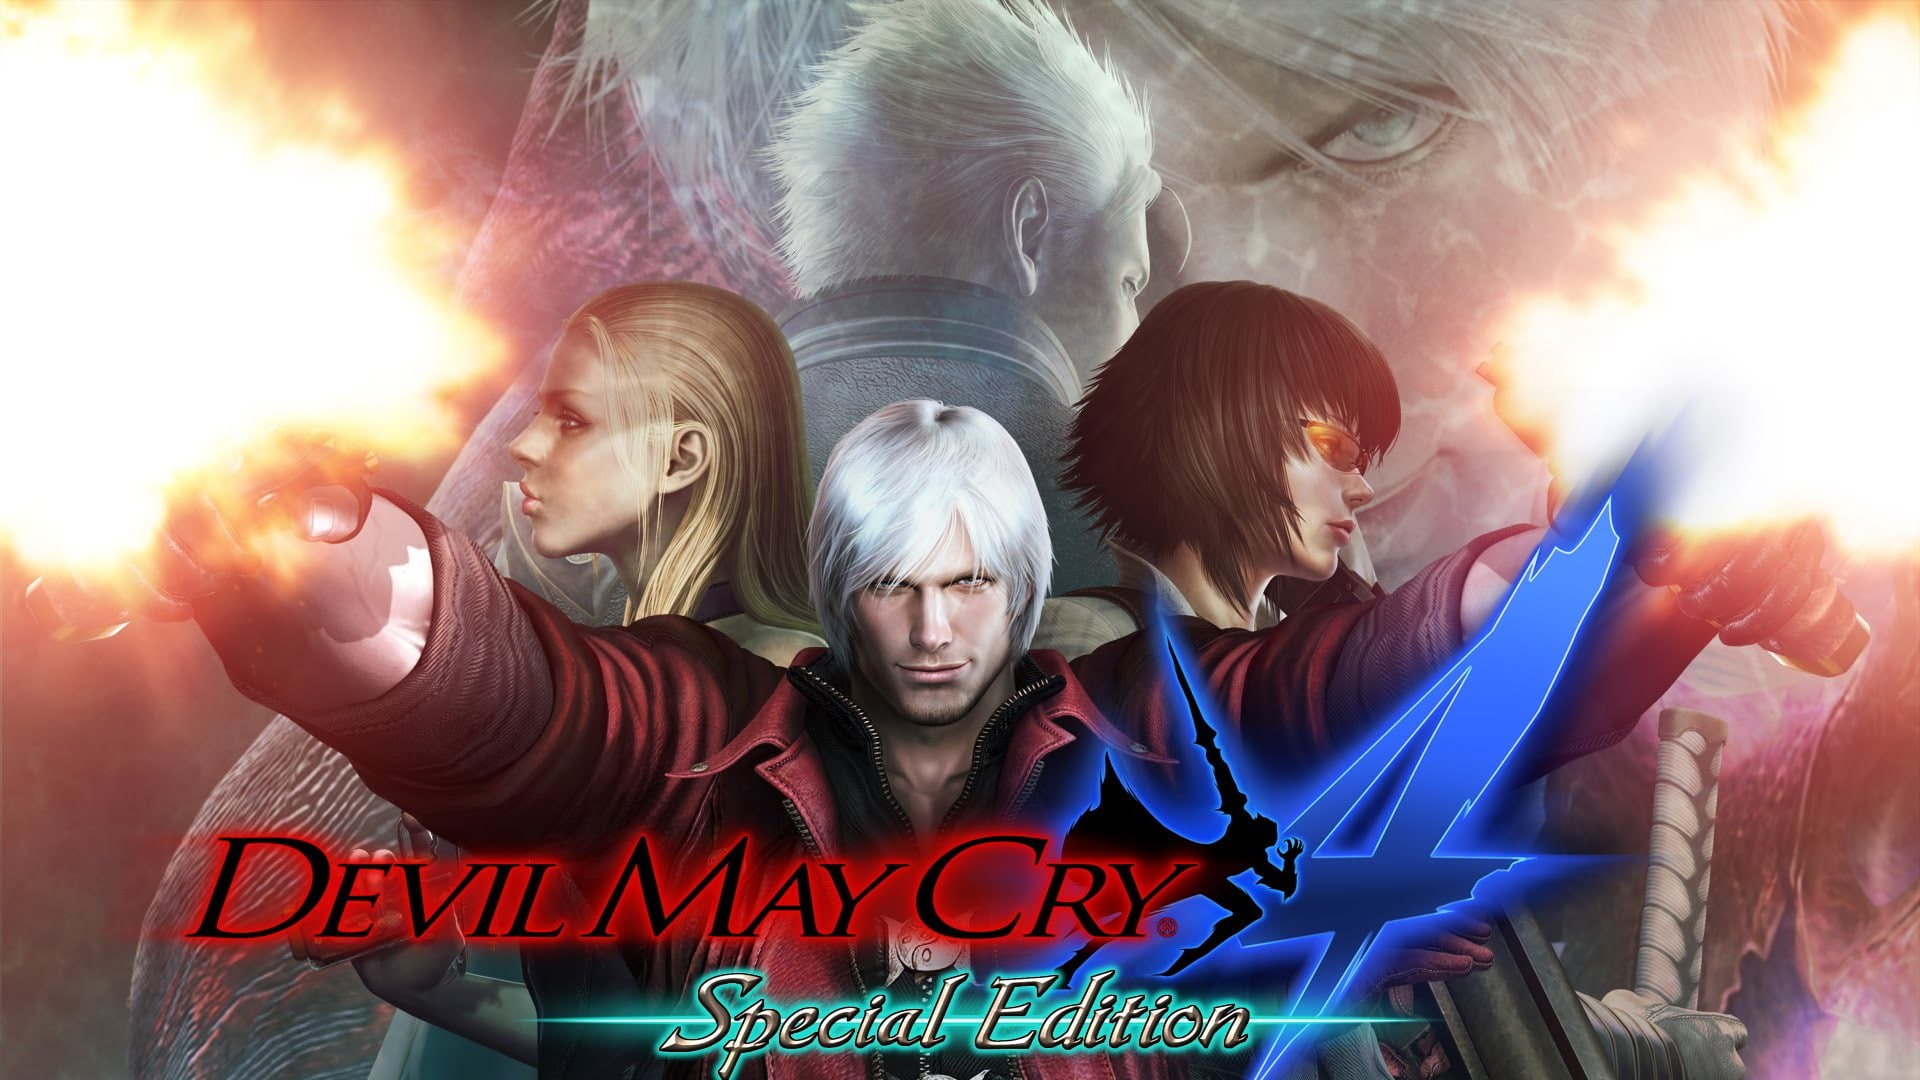 Devil May Cry, Dante, Vergil, Trish, Lady (Devil May Cry), adult